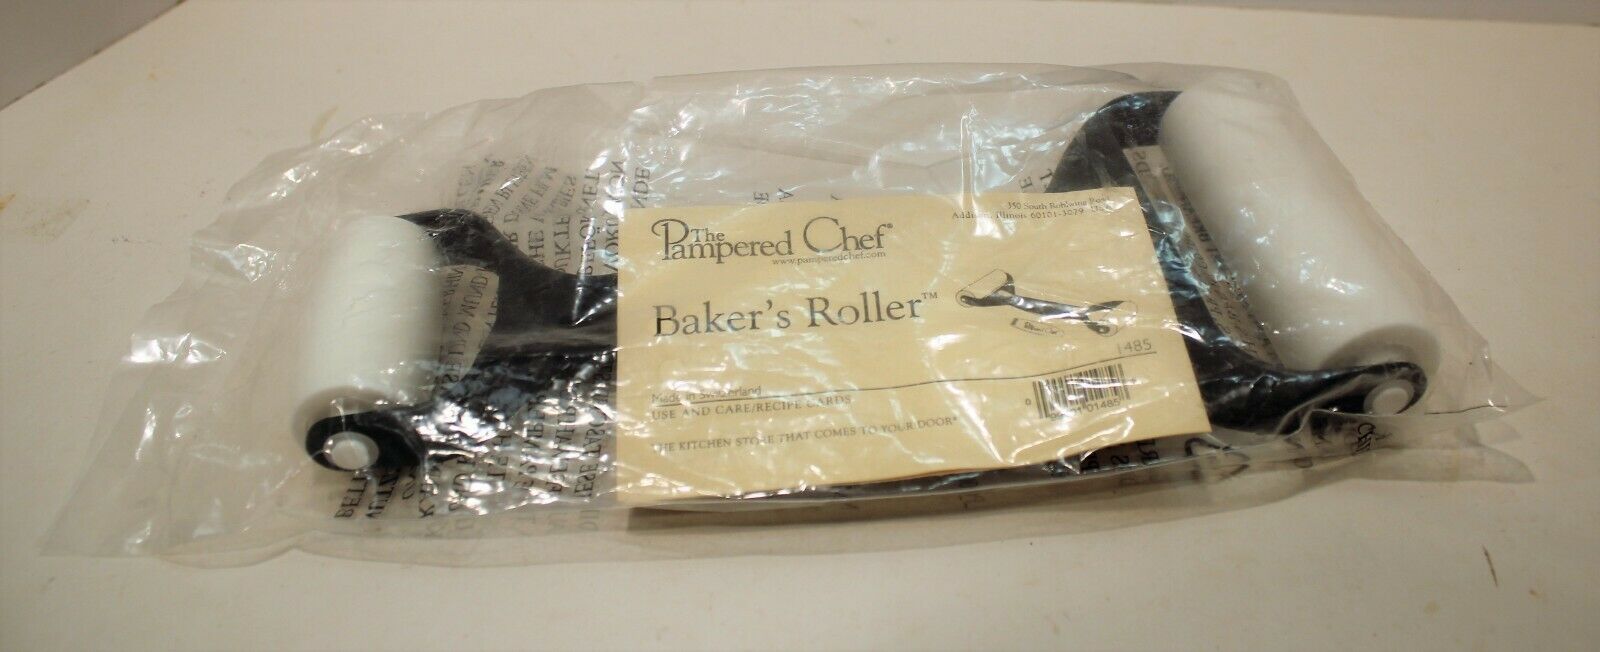 New Sealed The Pampered Chef Bakers Roller 485, Baking Rolling Pin Tool